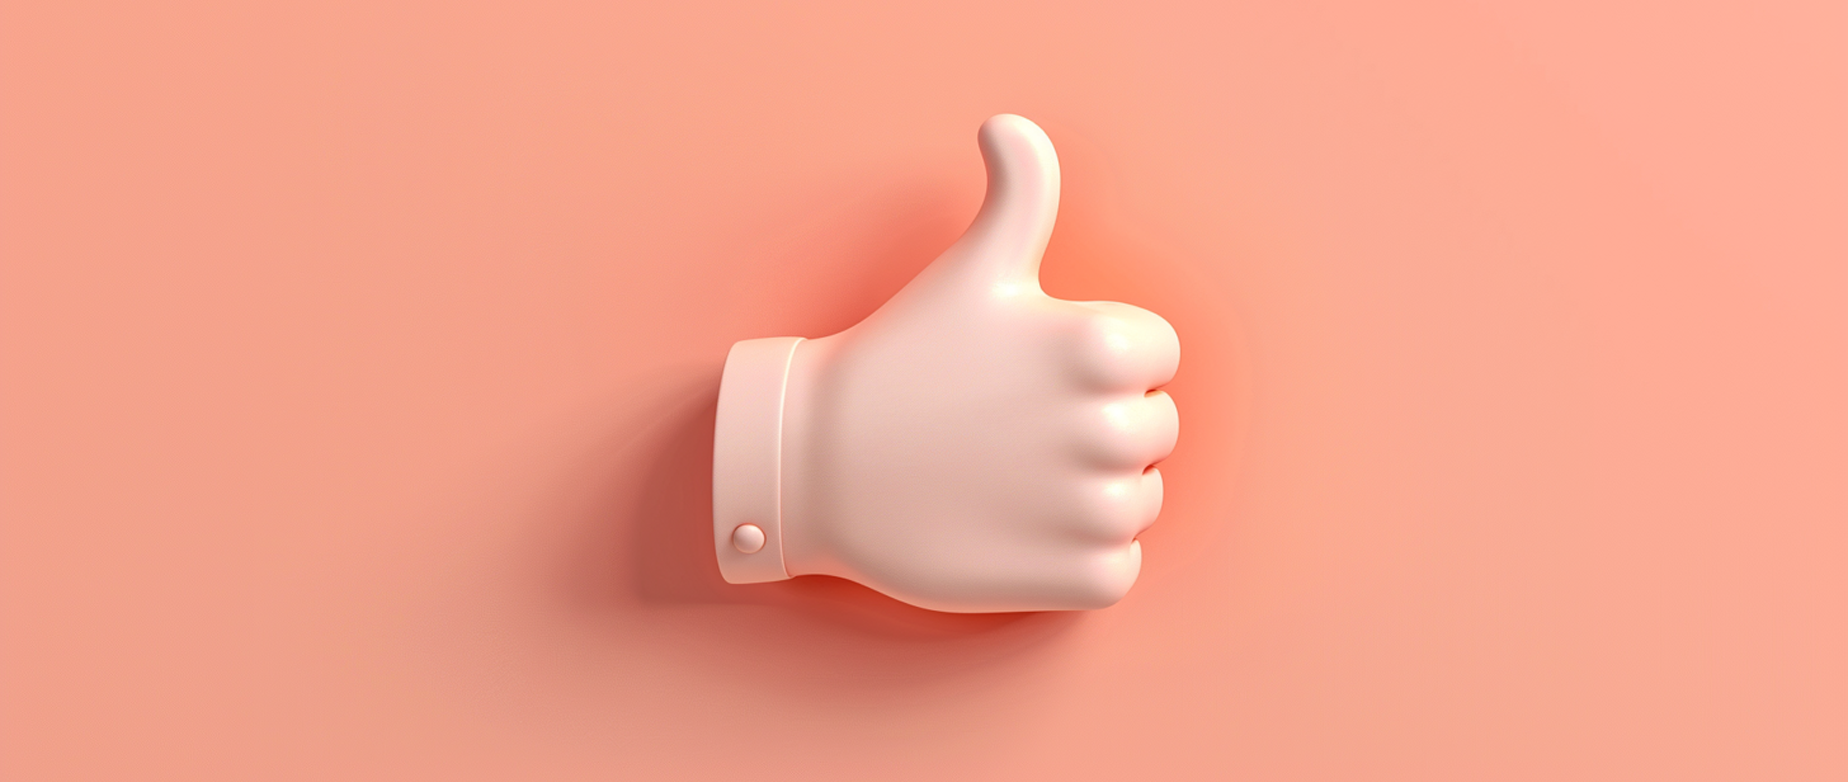 A white glove giving a thumbs up on a red background.